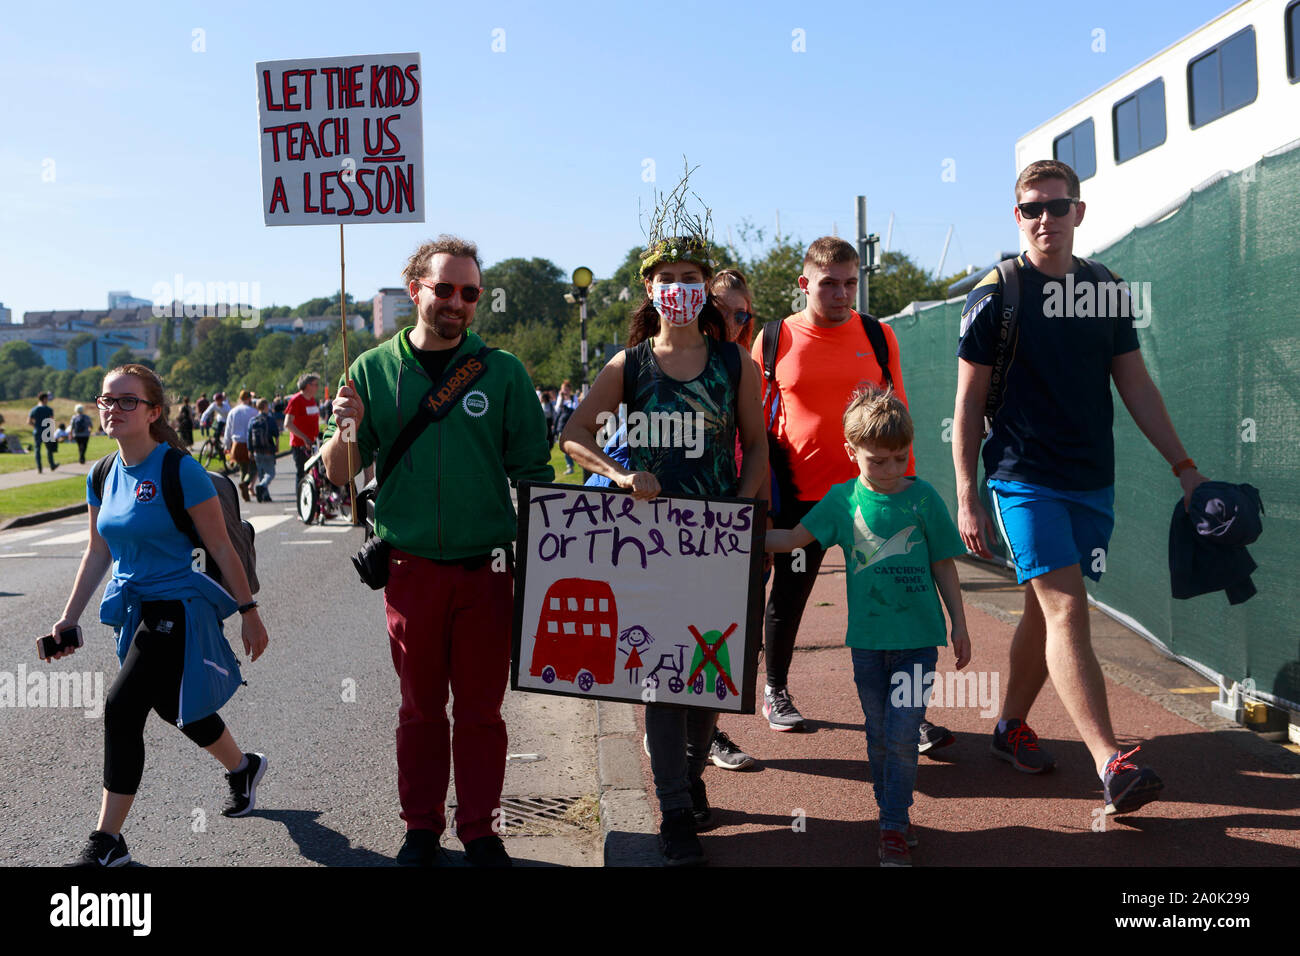 Edinburgh, UK. 20 September. 2019. Campaigners protest during a climate change action in Edinburgh. Climate Change Strike takes place in Edinburgh. UK. Pako Mera/Alamy Live News Stock Photo